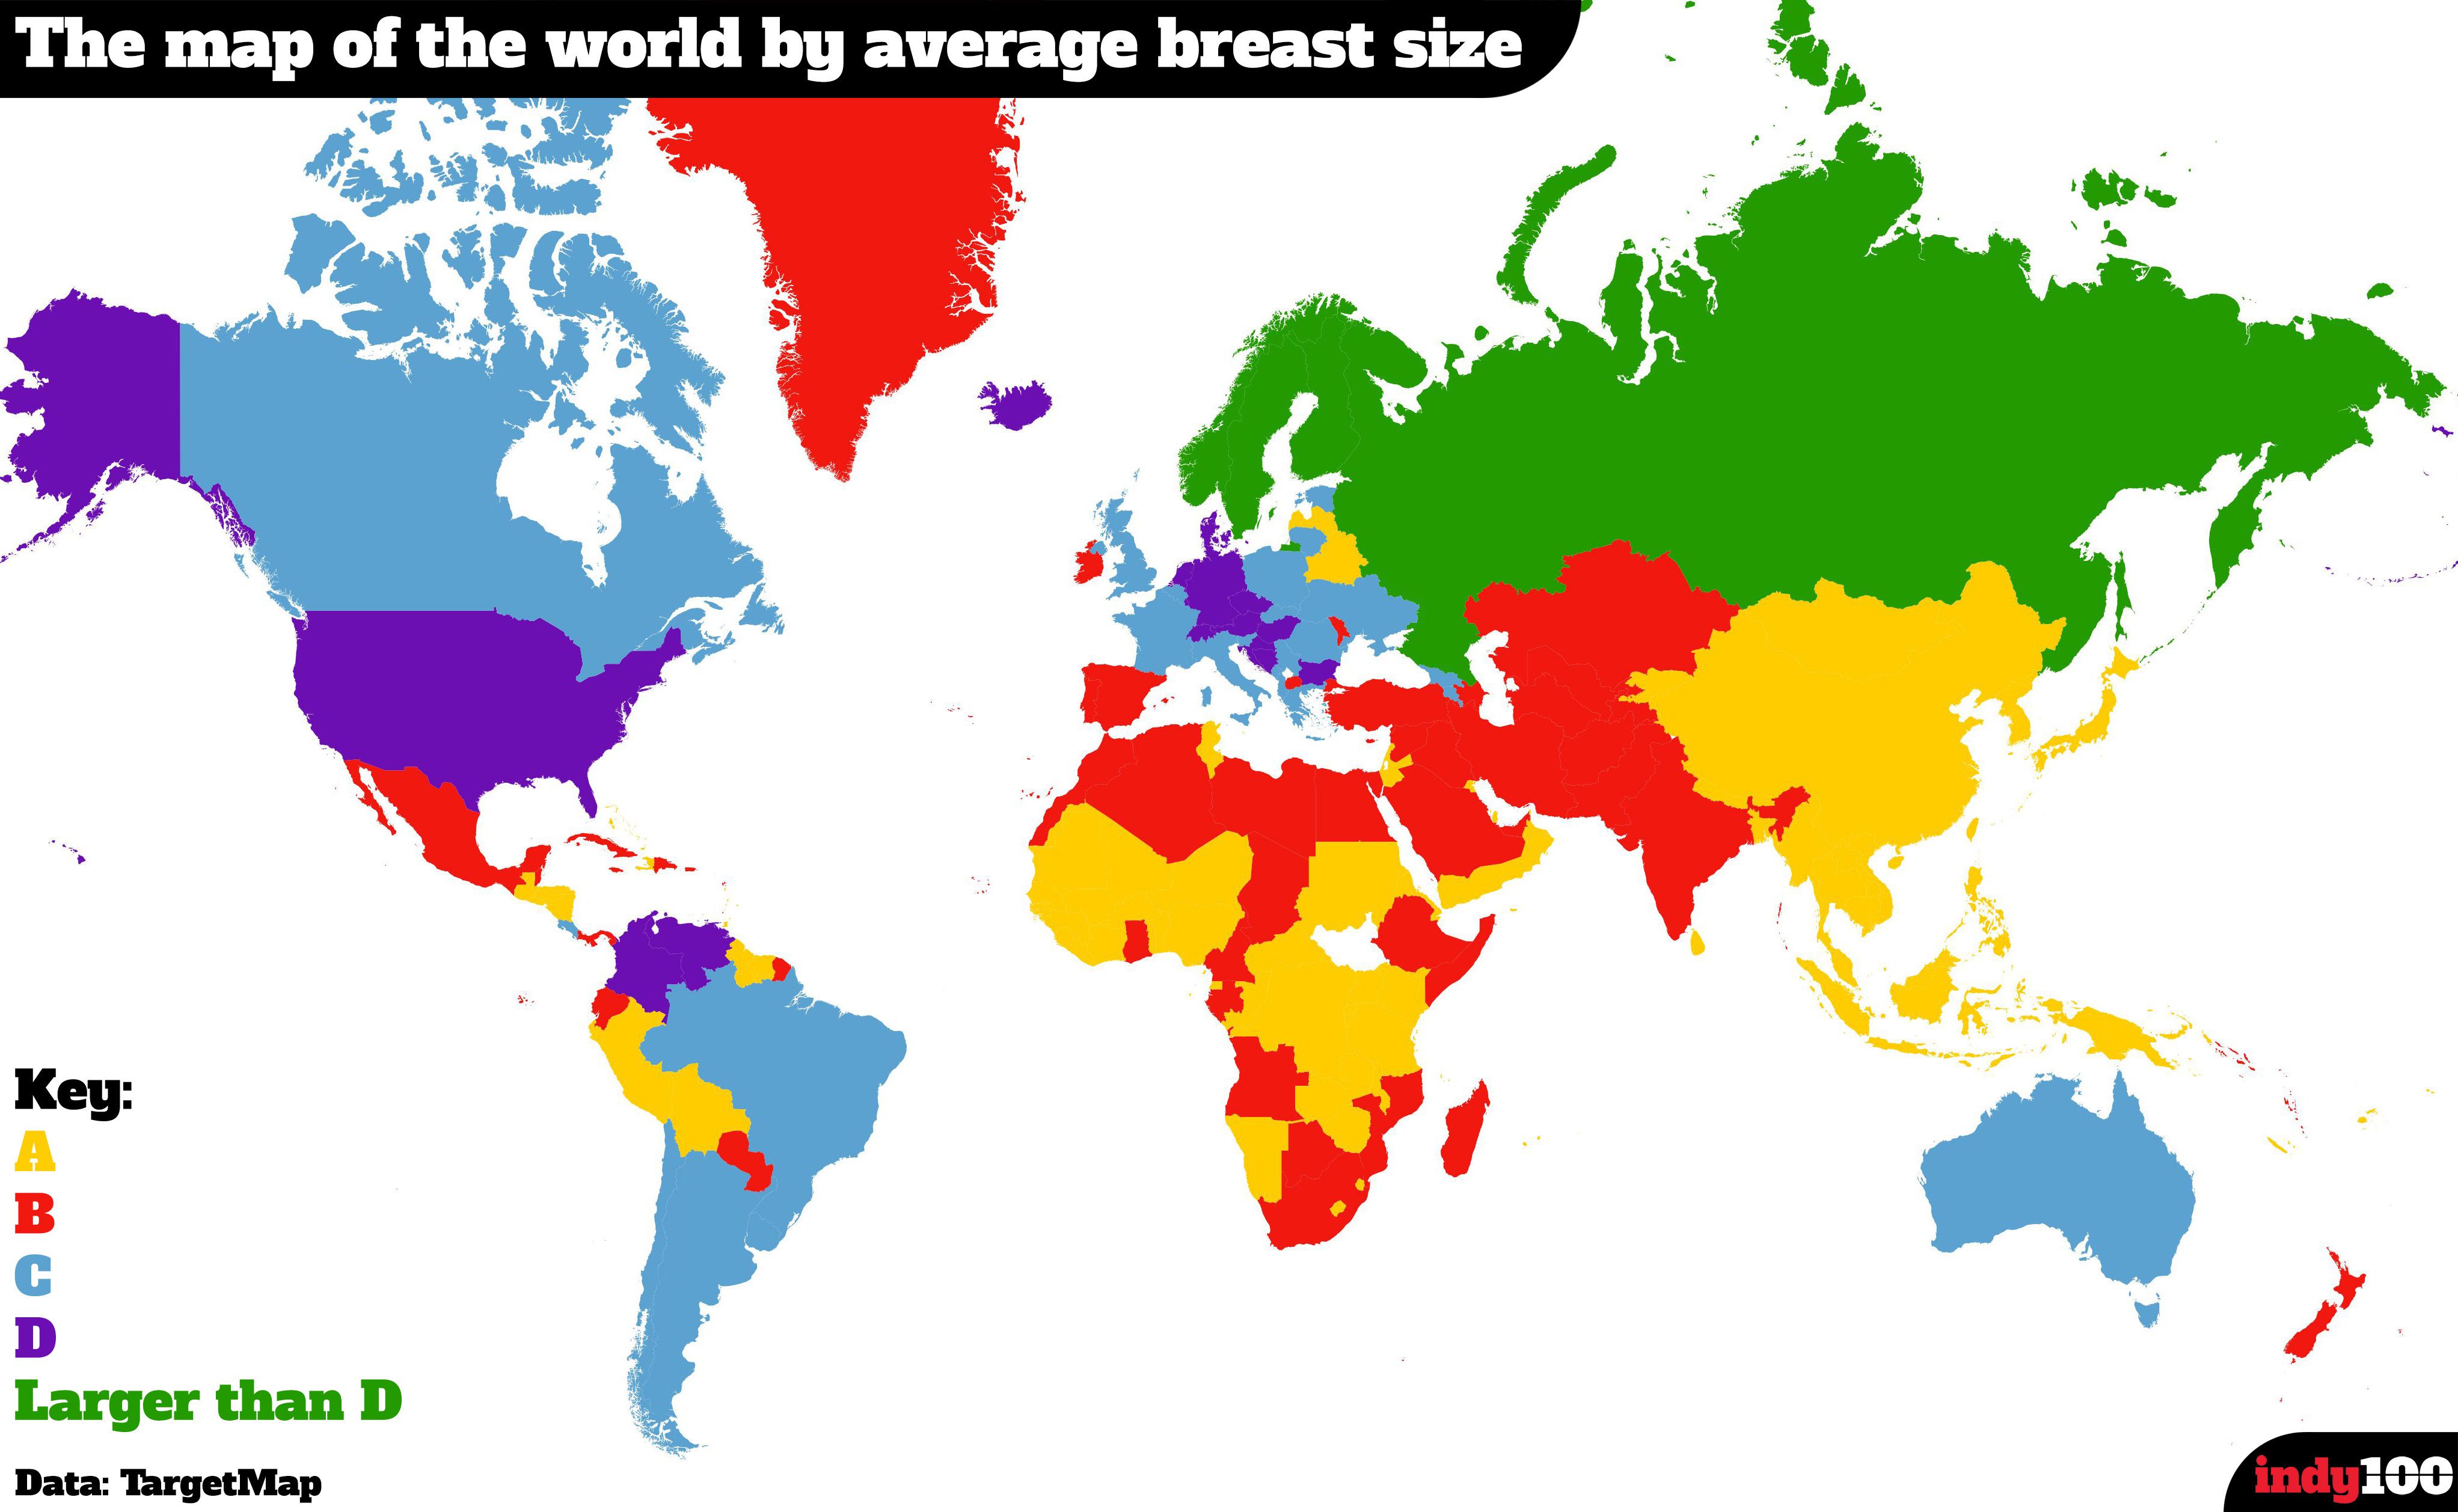 New map compares breast sizes around the world - NZ Herald